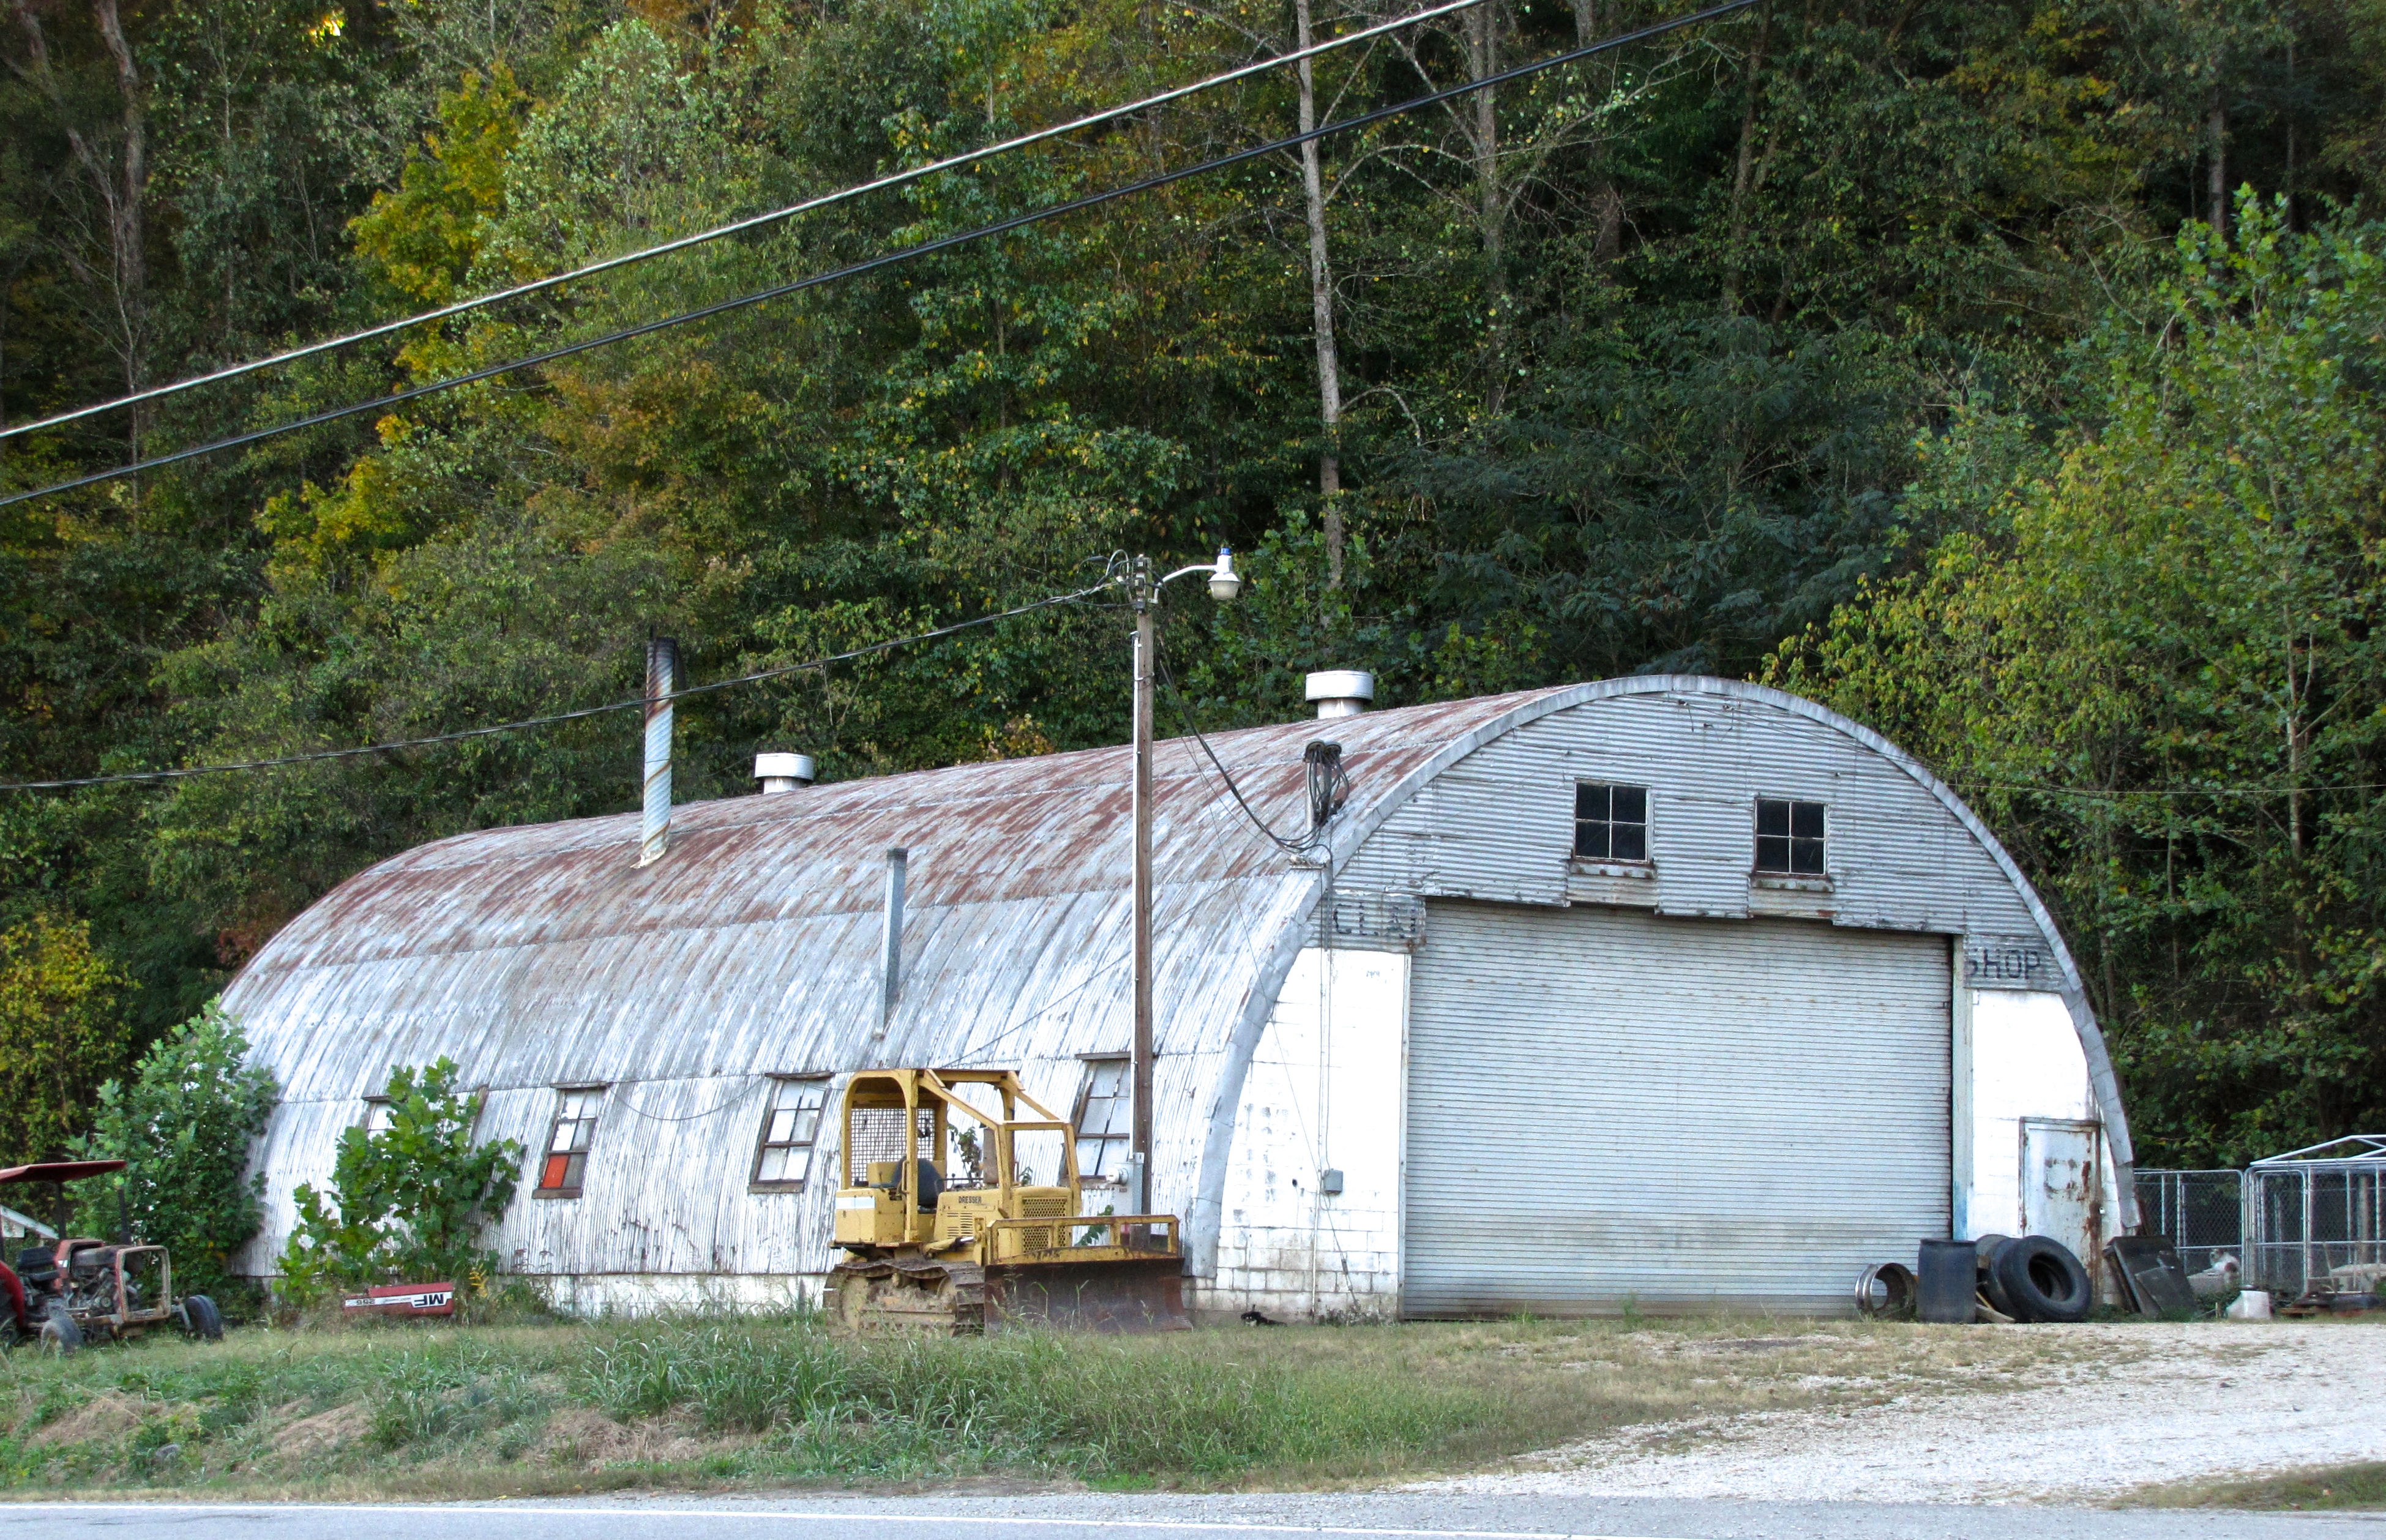 quonset hut in Troutdale, OR